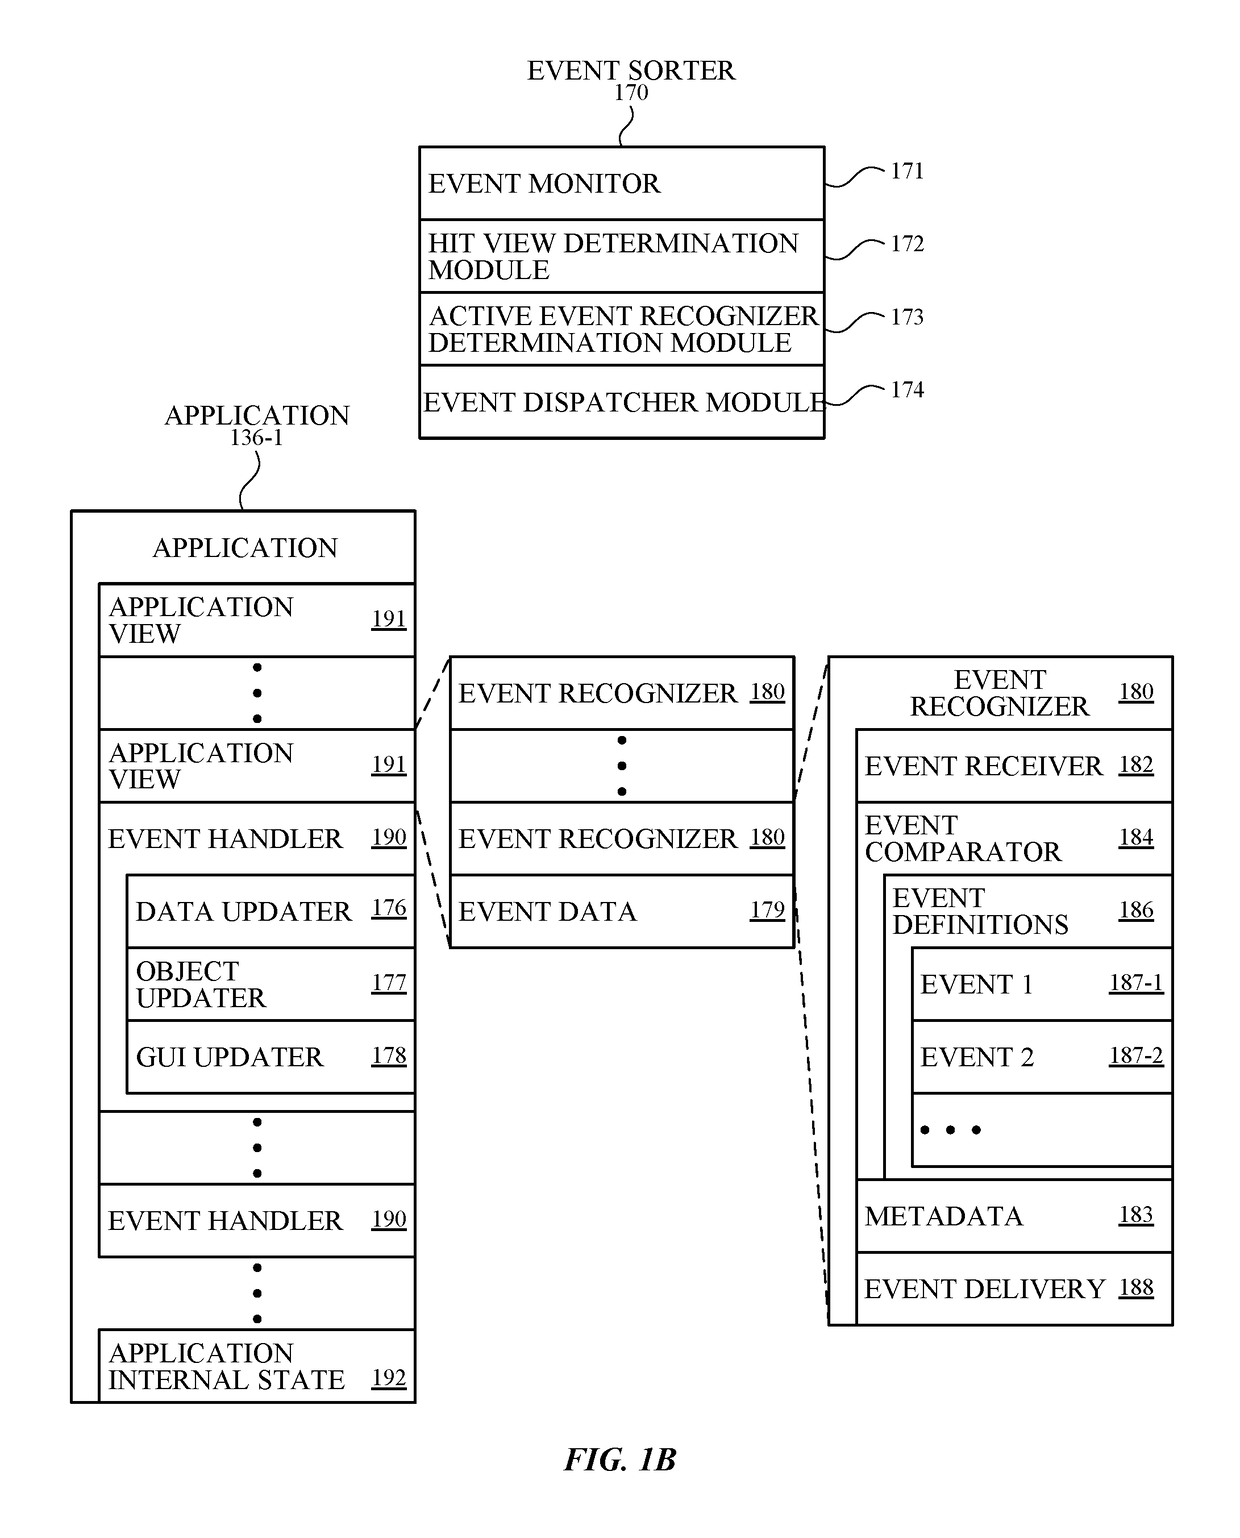 Displaying a predetermined view of an application